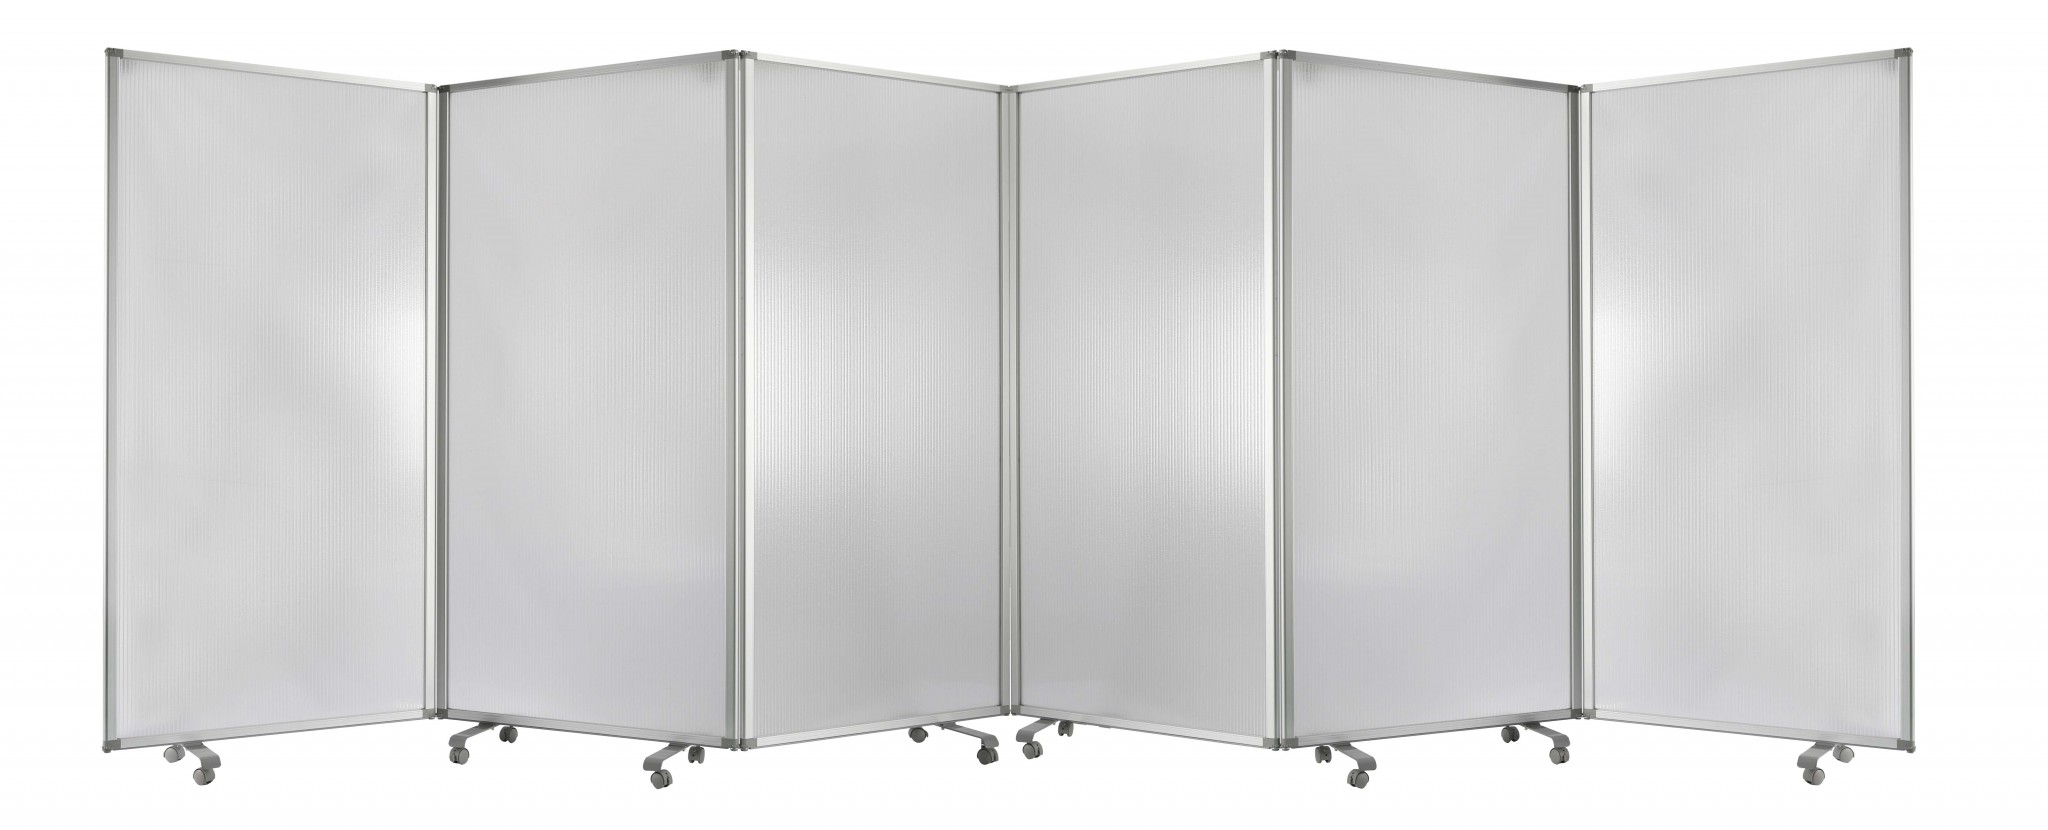 212" x 1" x 71" Clear, Metal, 6 Panel, Resilient Screen